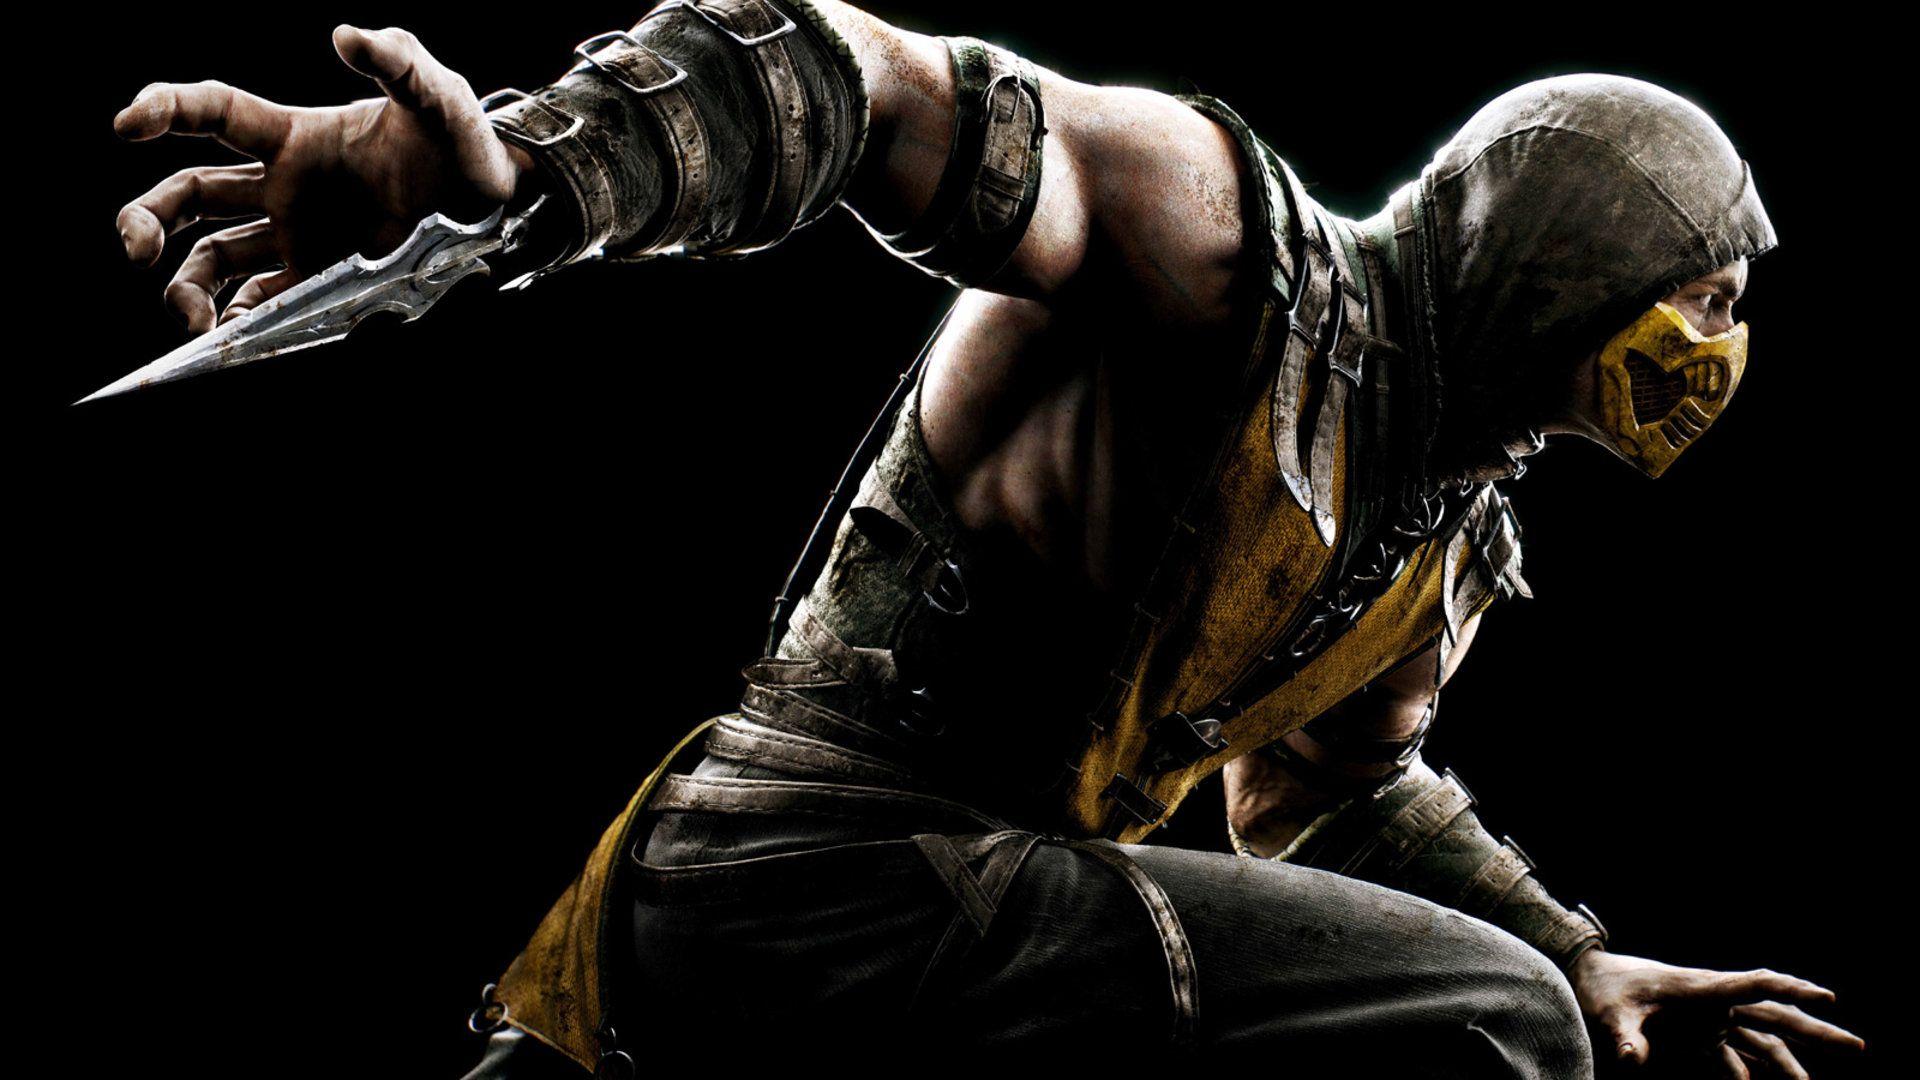 Mortal Kombat X Character Strengths and Weaknesses